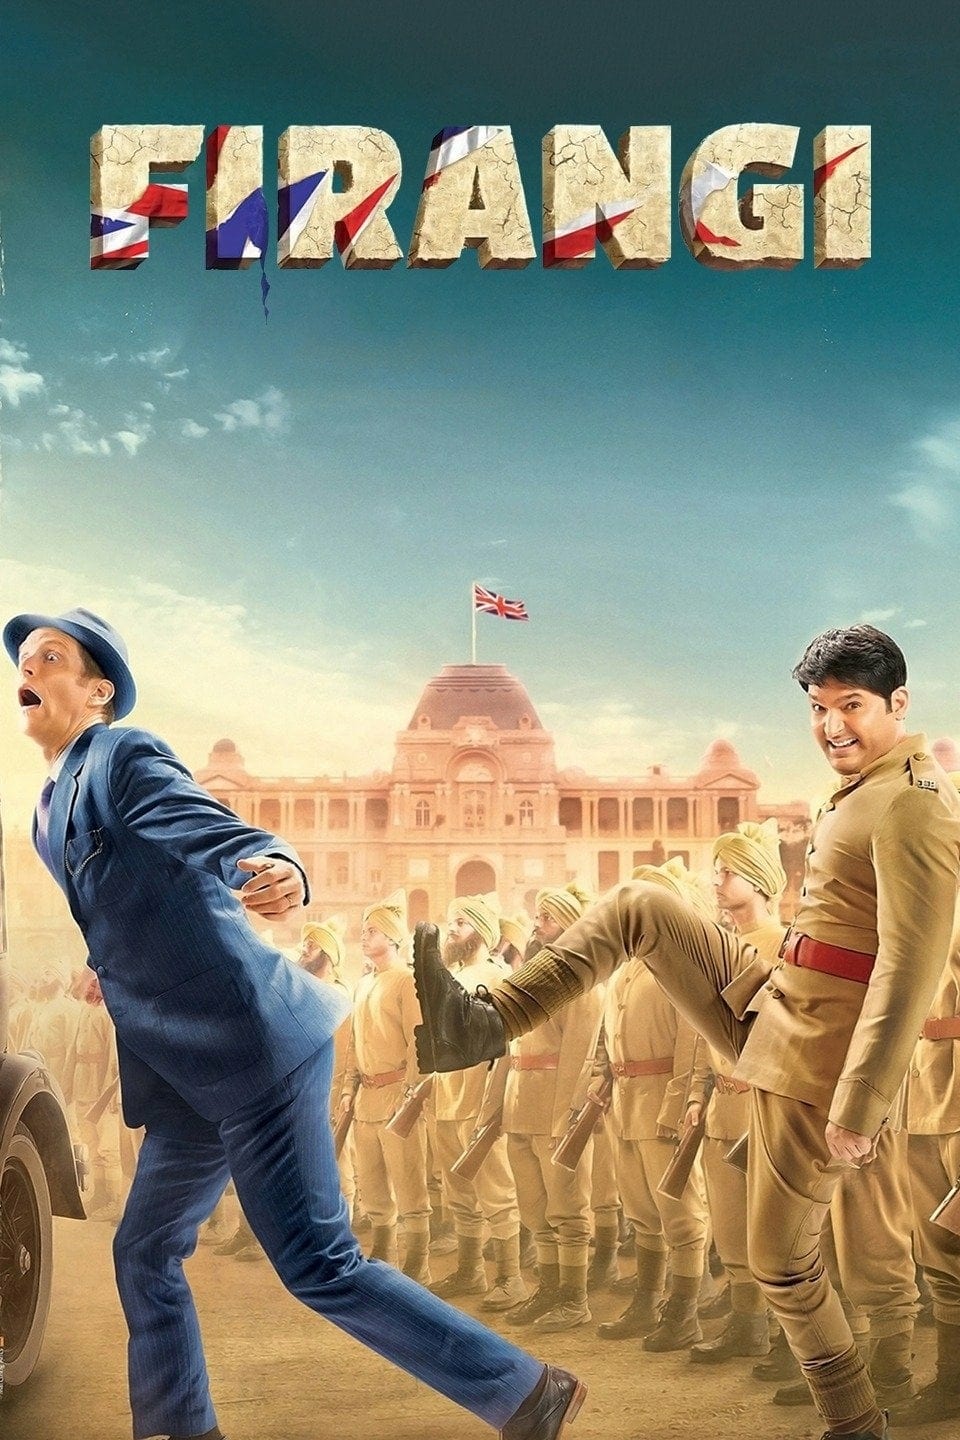 Poster for the movie "Firangi"